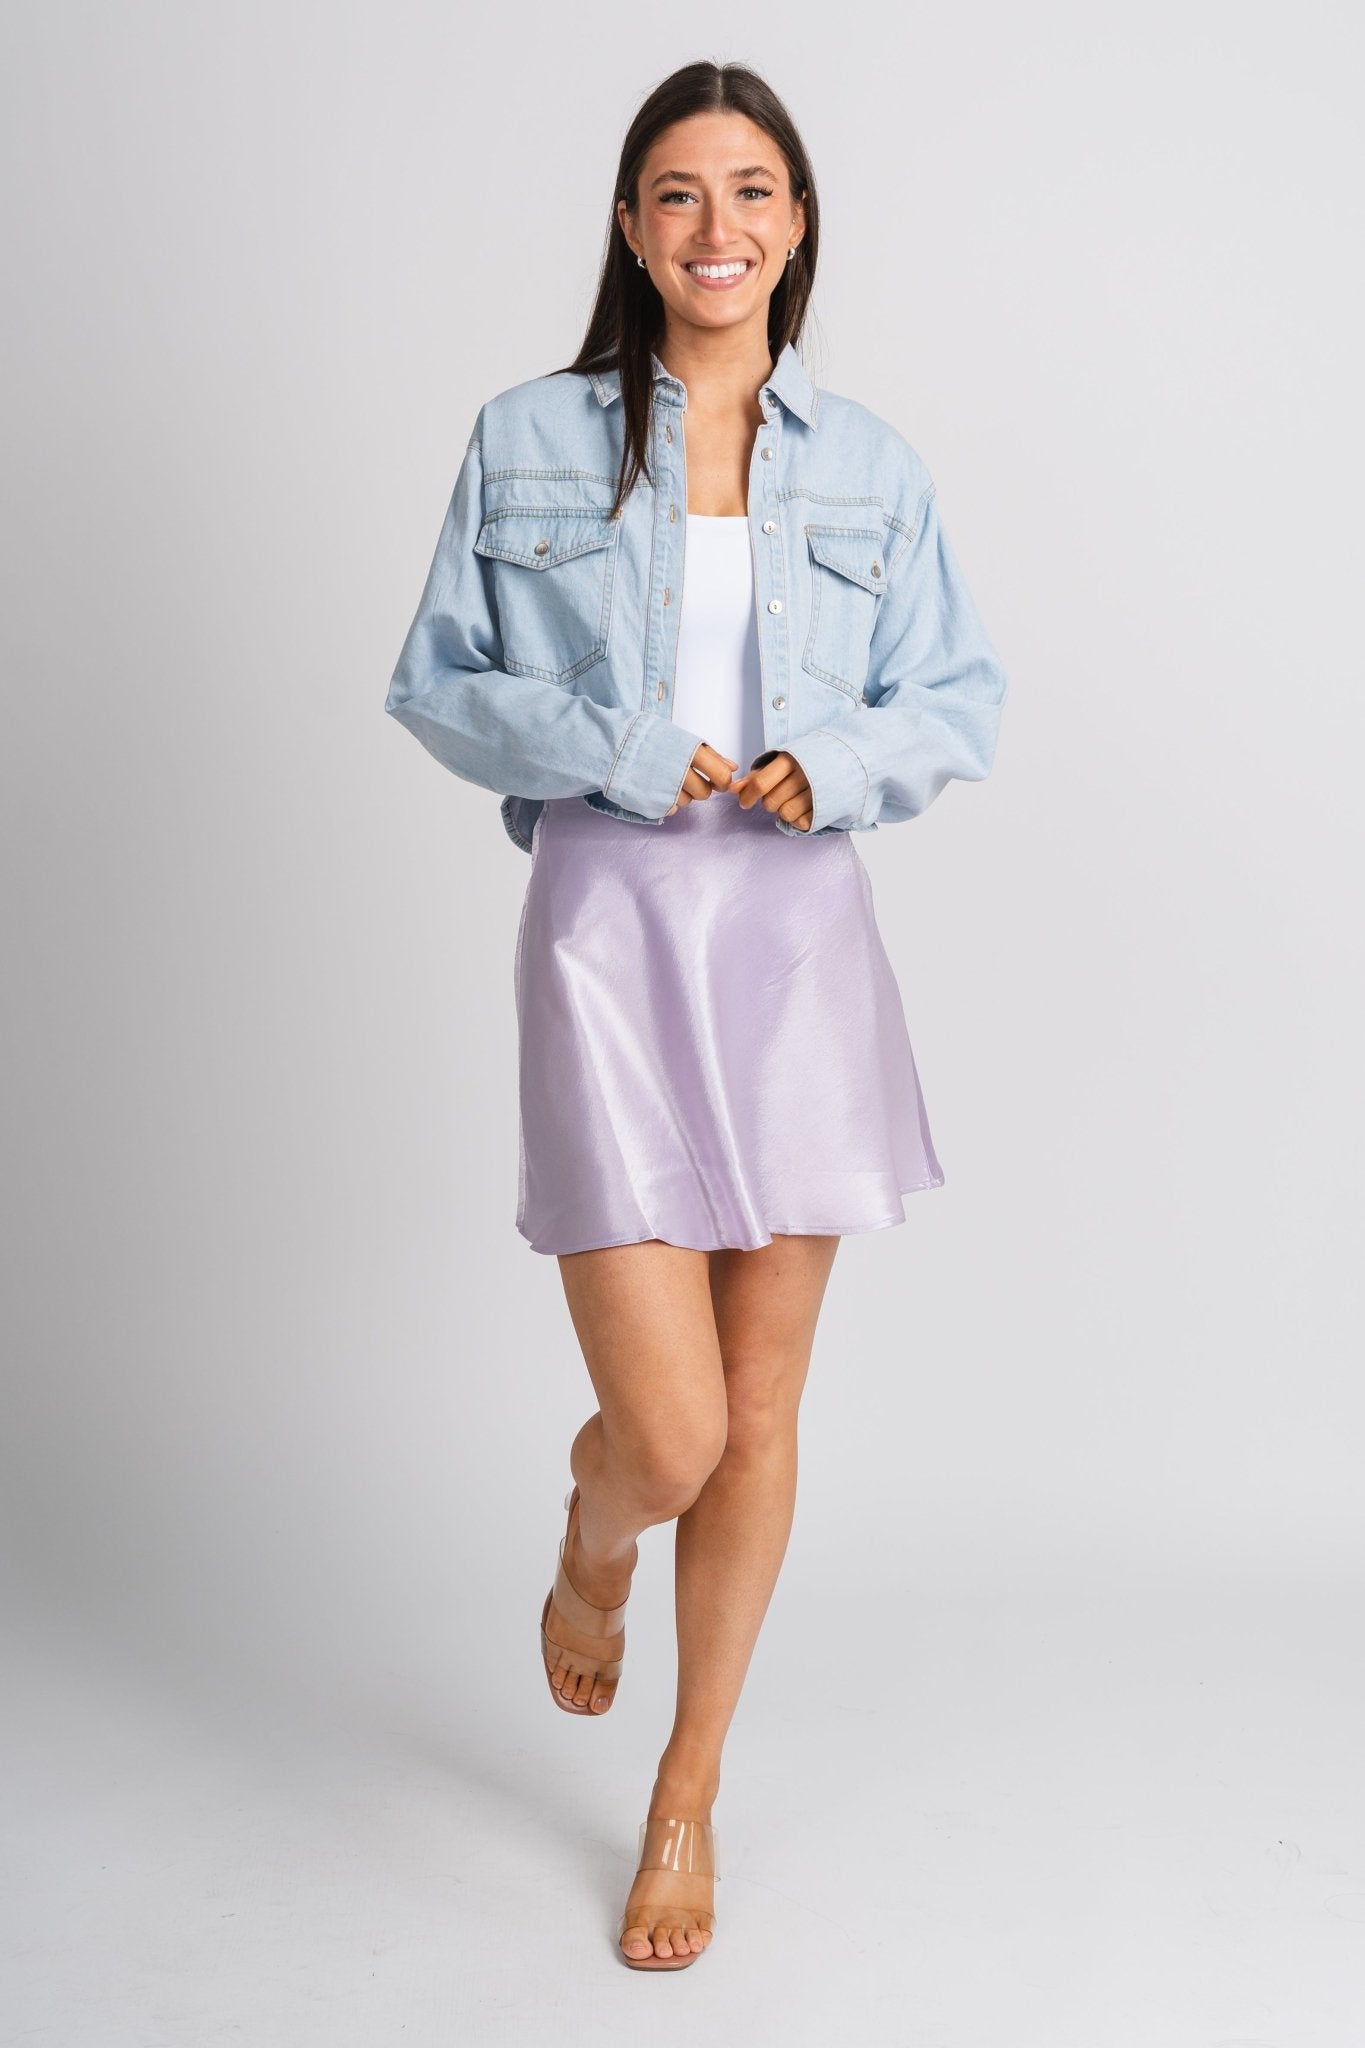 Satin flare mini skirt lavender - Cute Skirt - Trendy Easter Clothing Line at Lush Fashion Lounge Boutique in Oklahoma